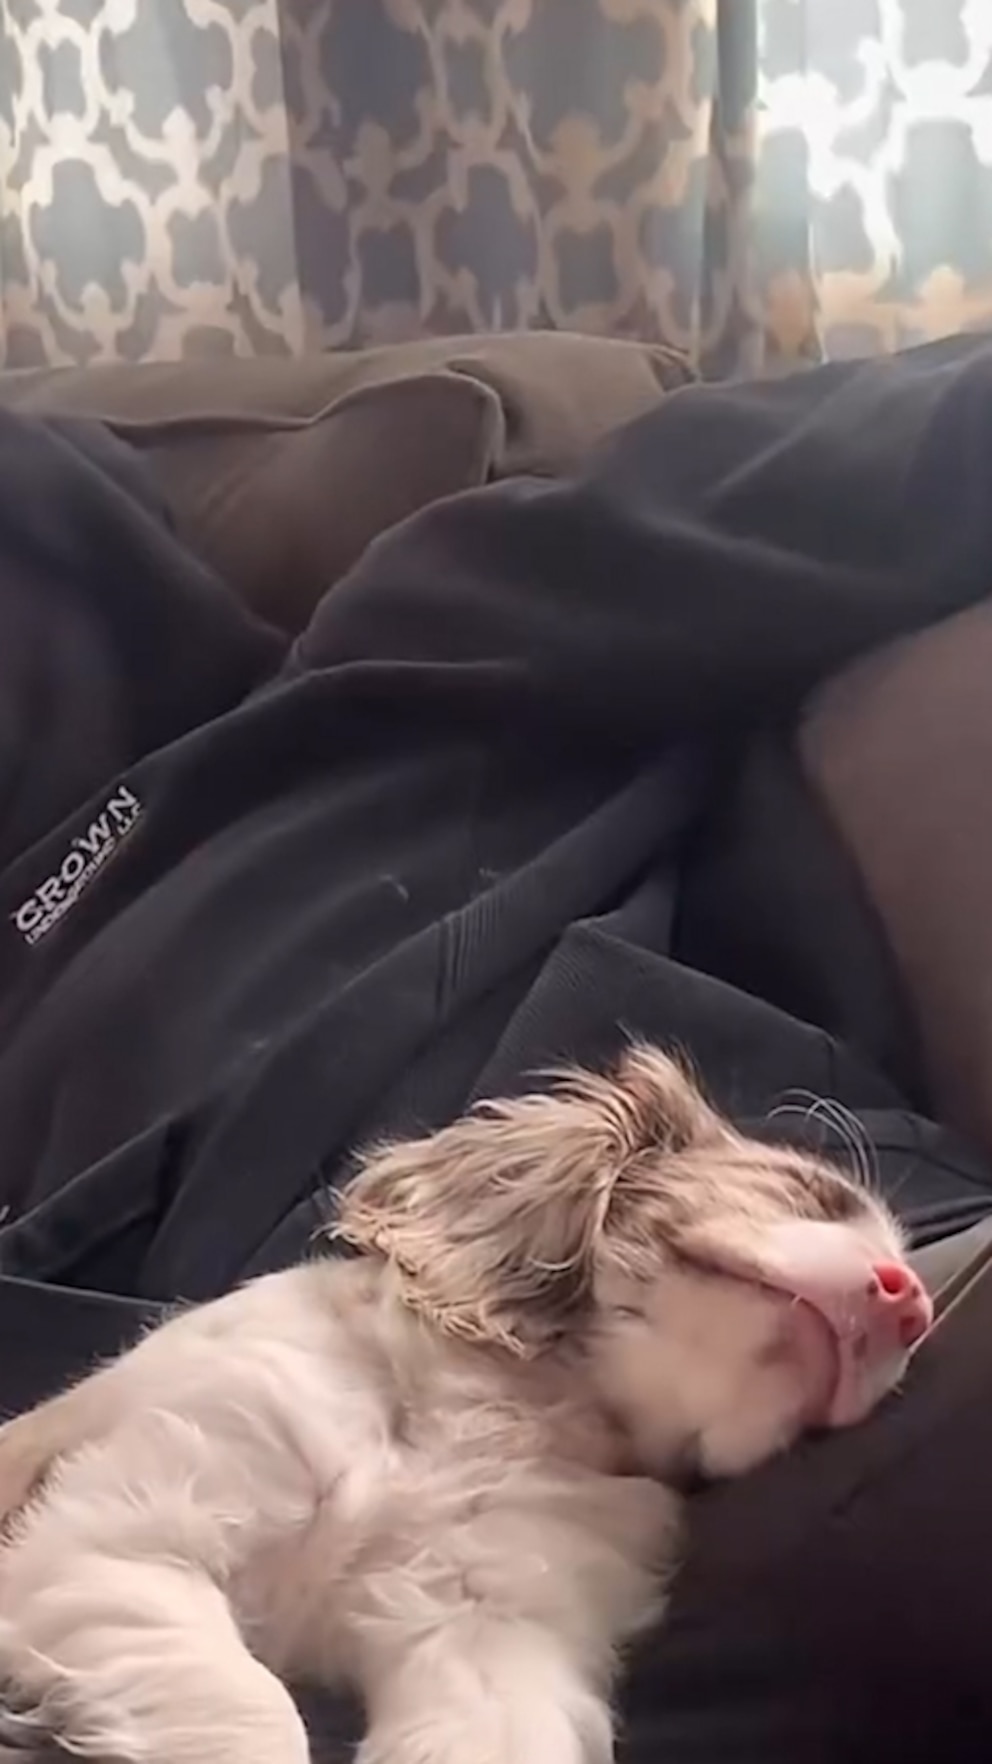 WATCH: Deaf and blind puppy has ‘great love story’ with her human dad